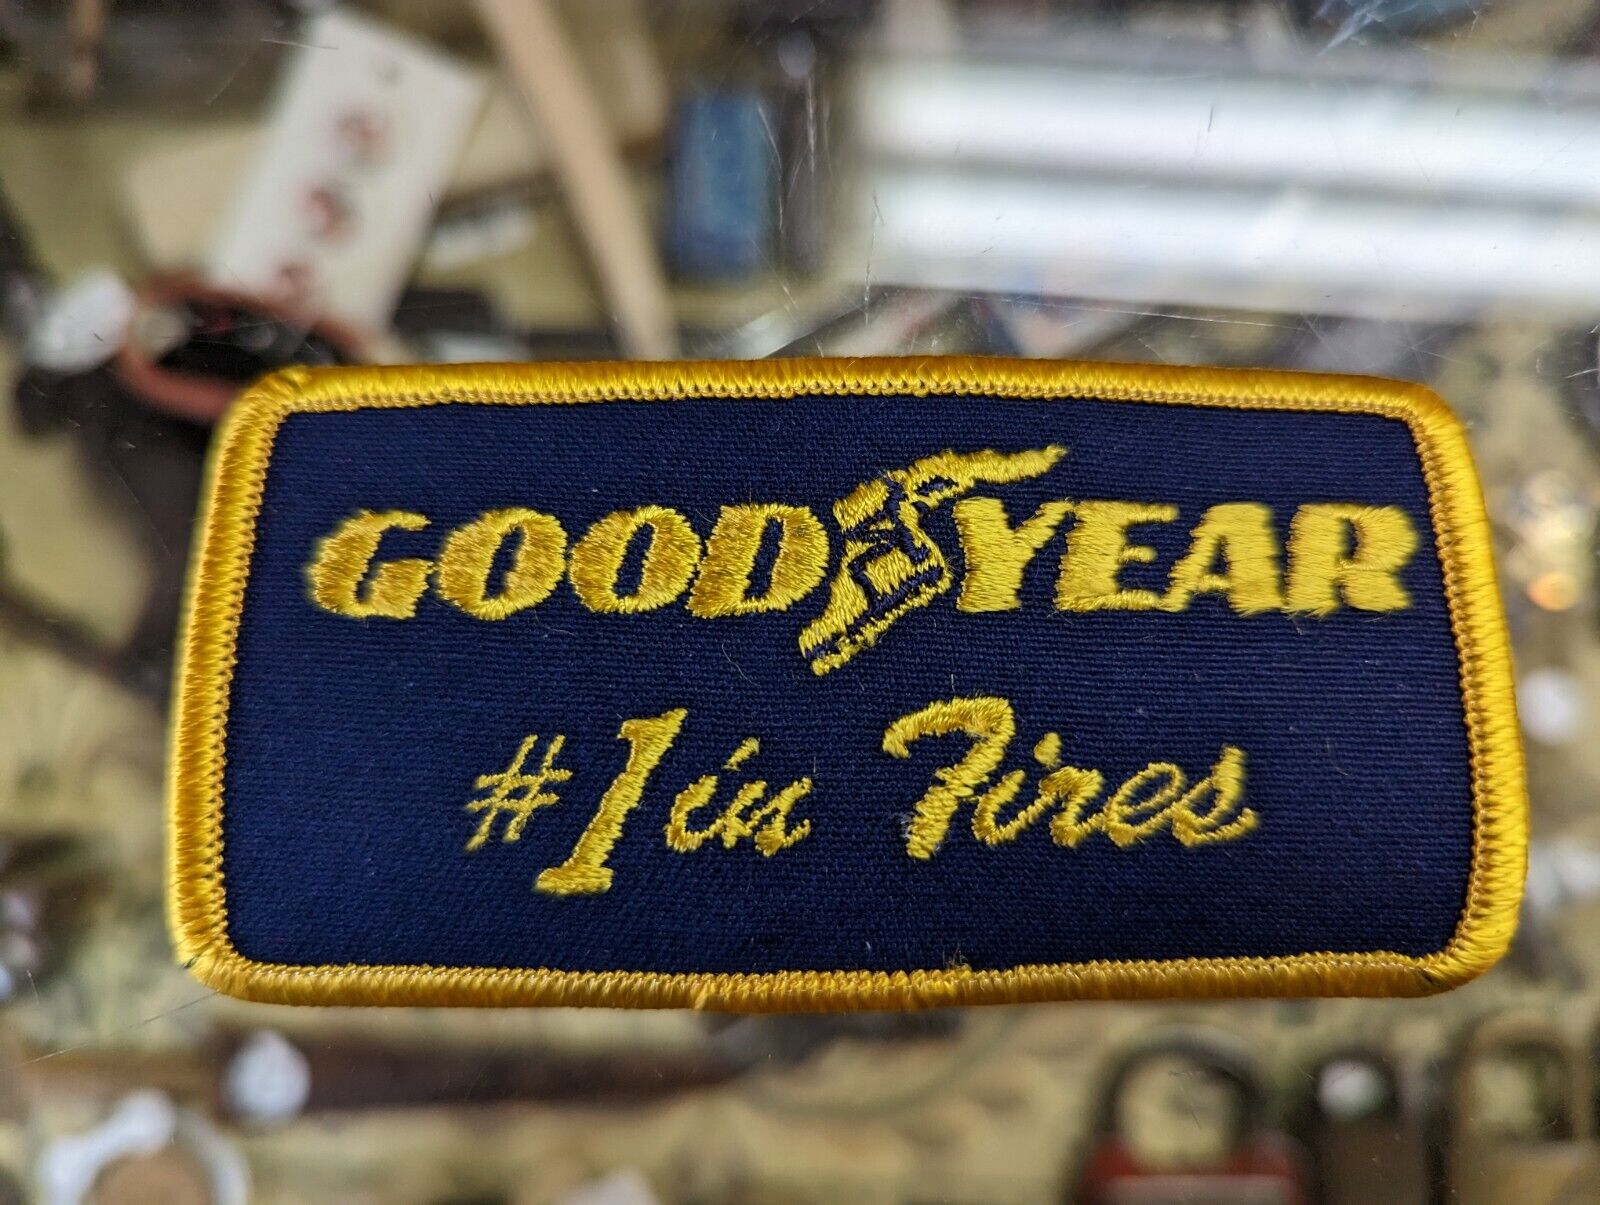 GOODYEAR-#1 In Tires Embroidered Iron On Uniform-Jacket Patch 3 3/4\